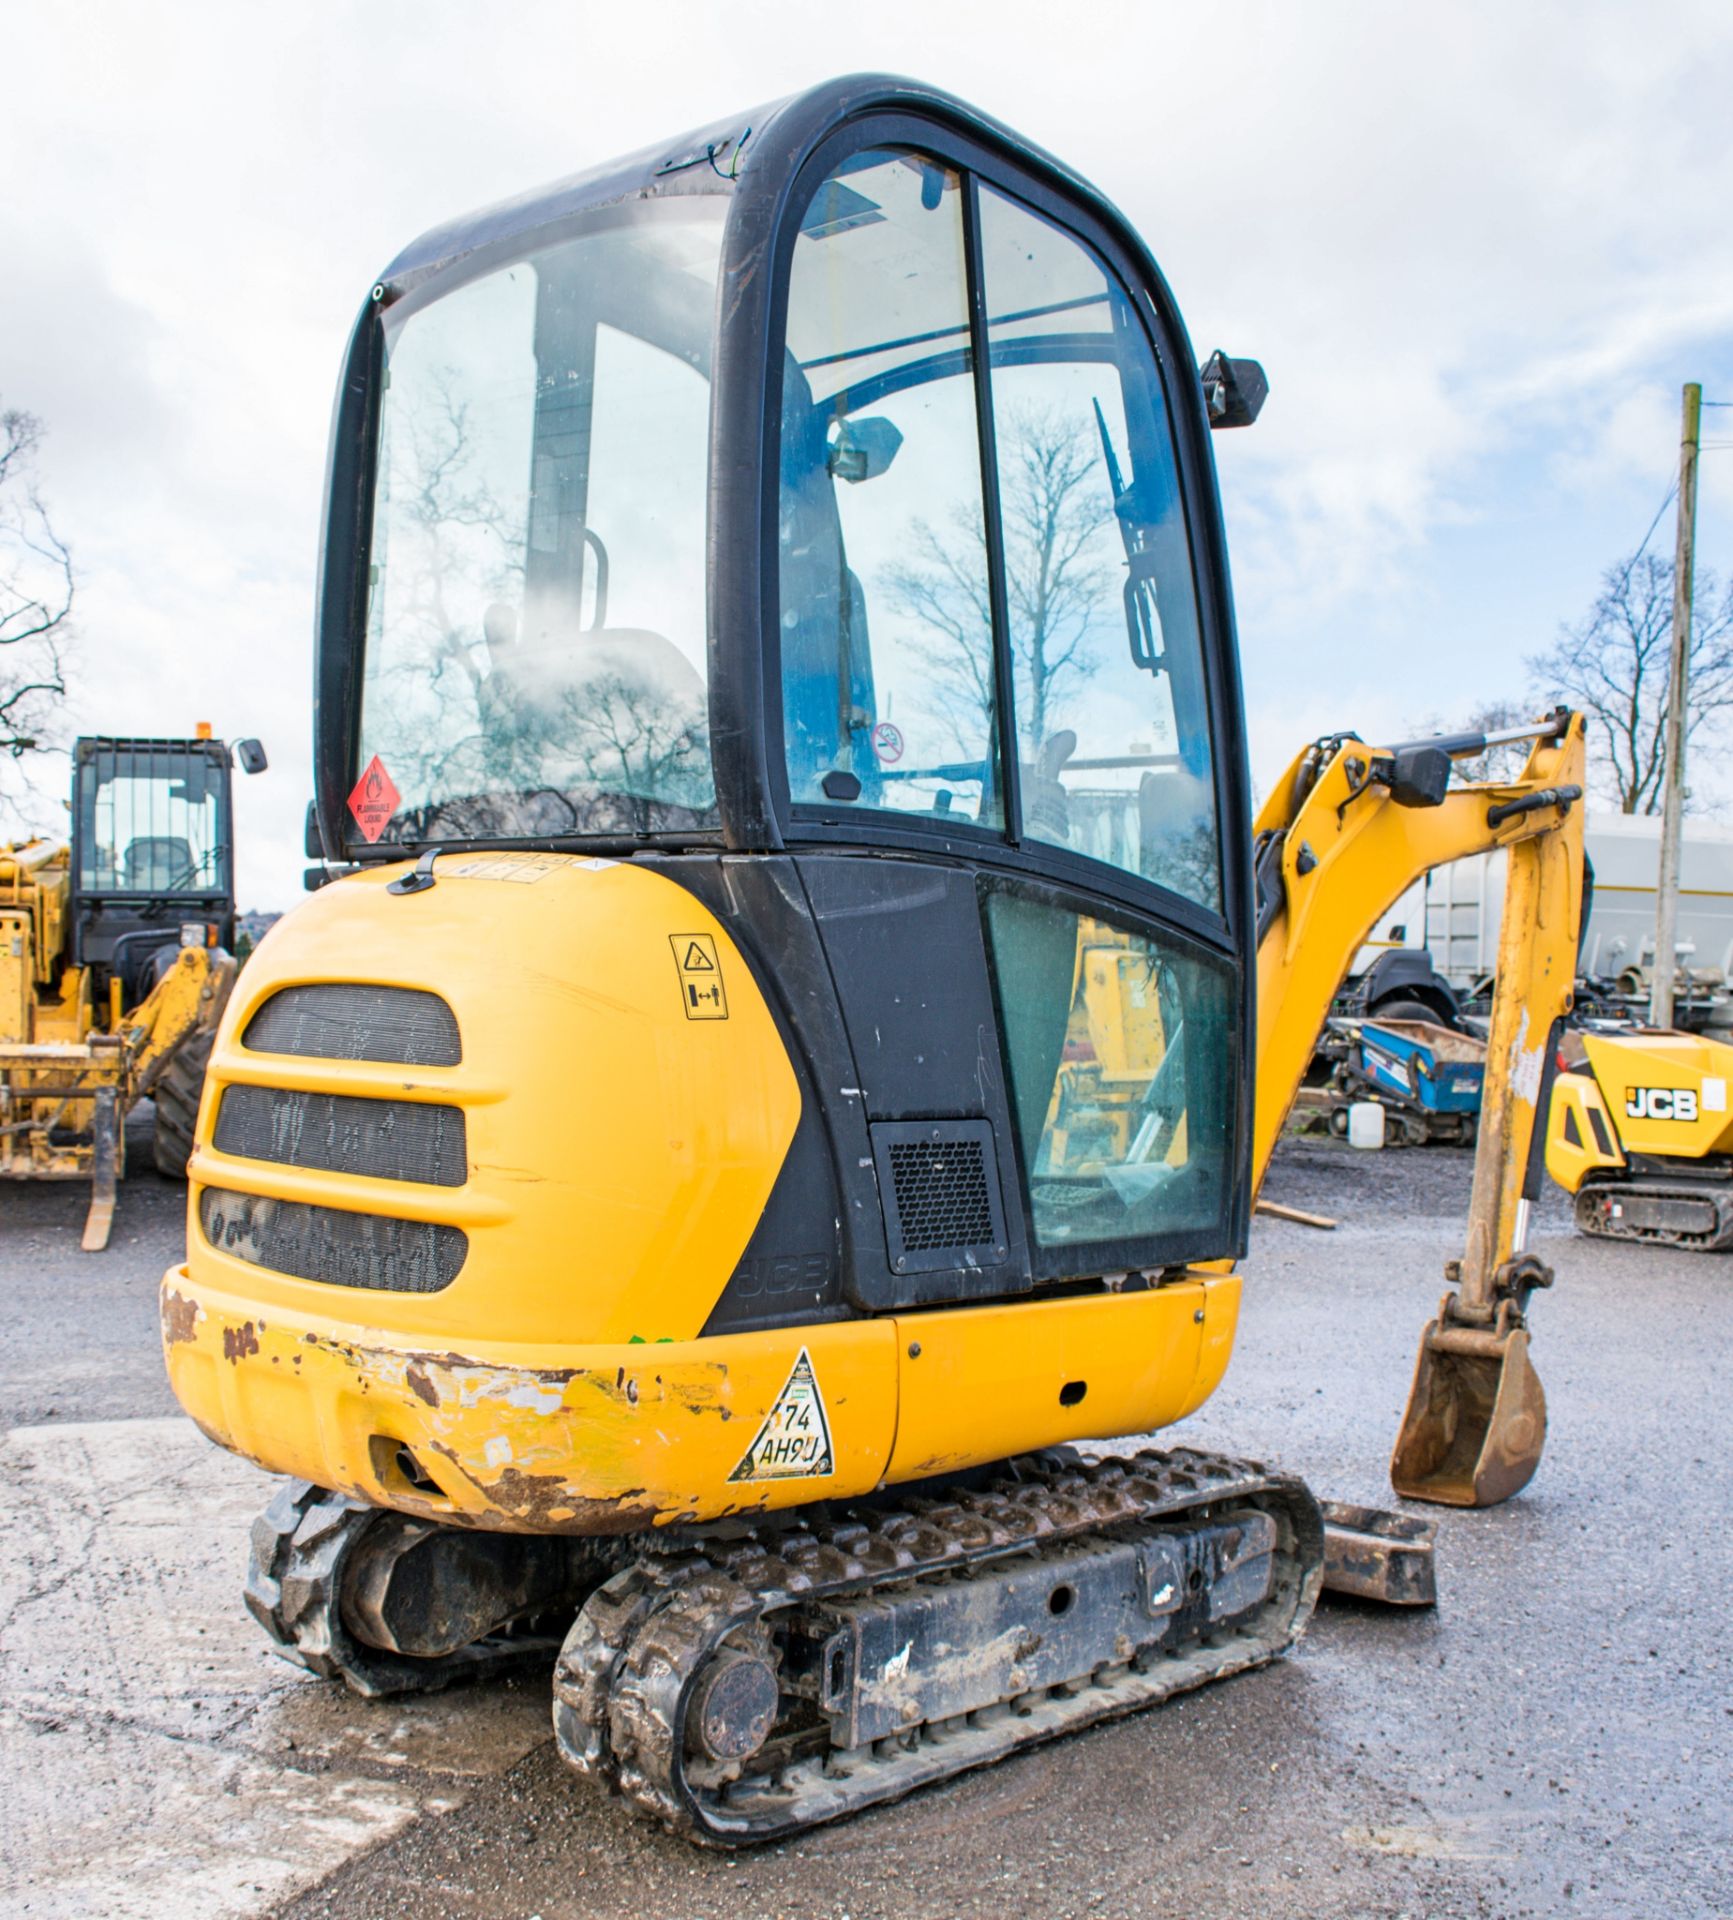 JCB 801.6 CTS 1.5 tonne rubber tracked mini excavator Year: 2013 S/N: 20171426 Recorded Hours: - Image 4 of 12